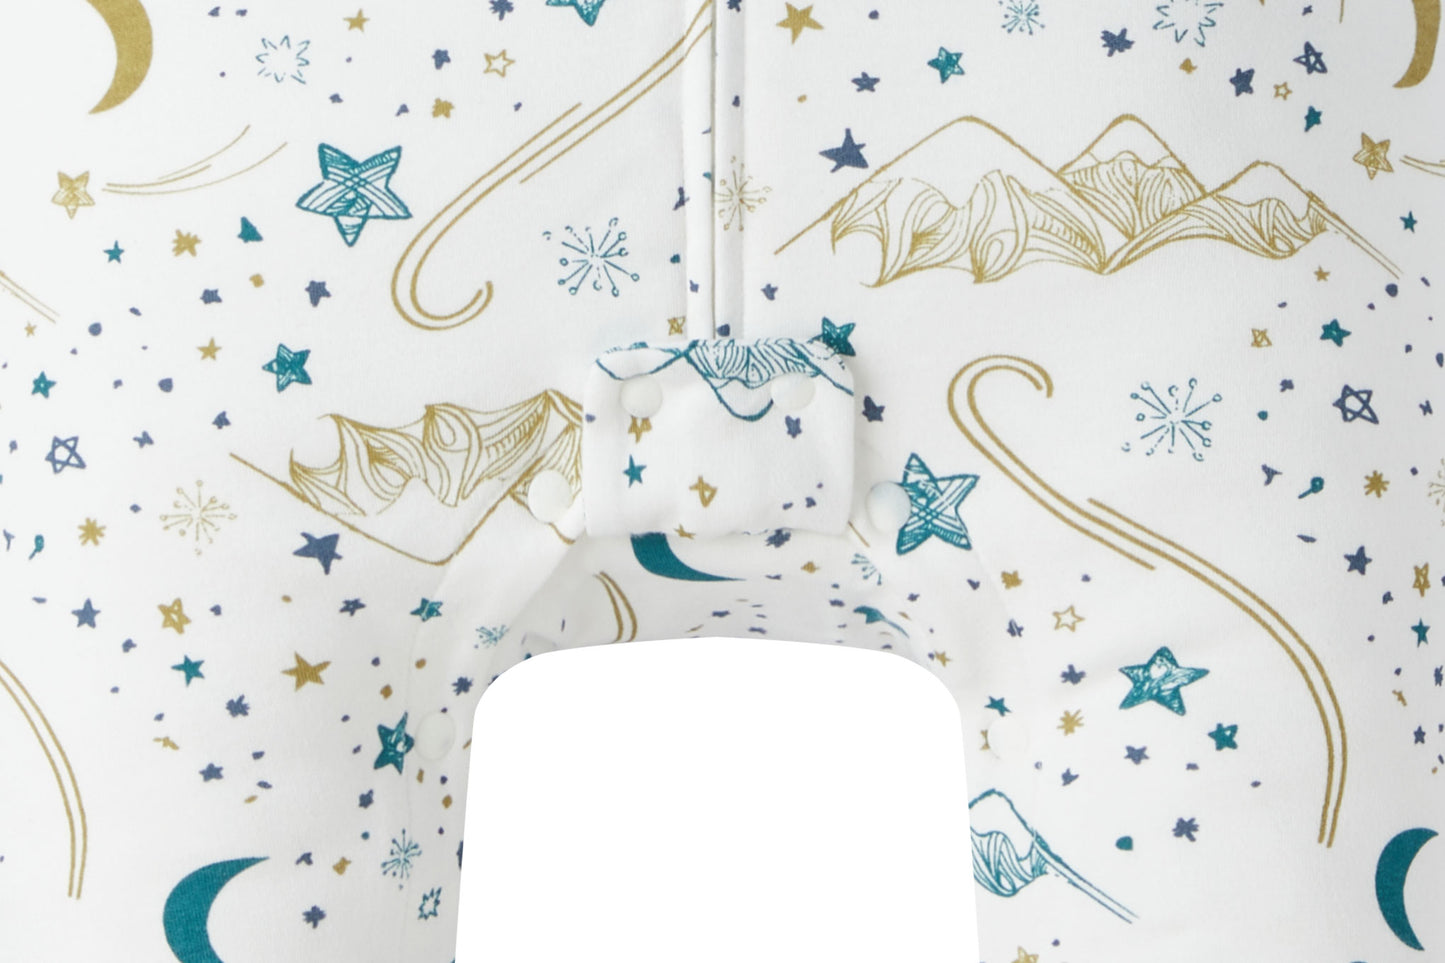 Load image into Gallery viewer, Long Sleeve Footed Sleep Bag 1.0 TOG (Organic Cotton) - Stars White
